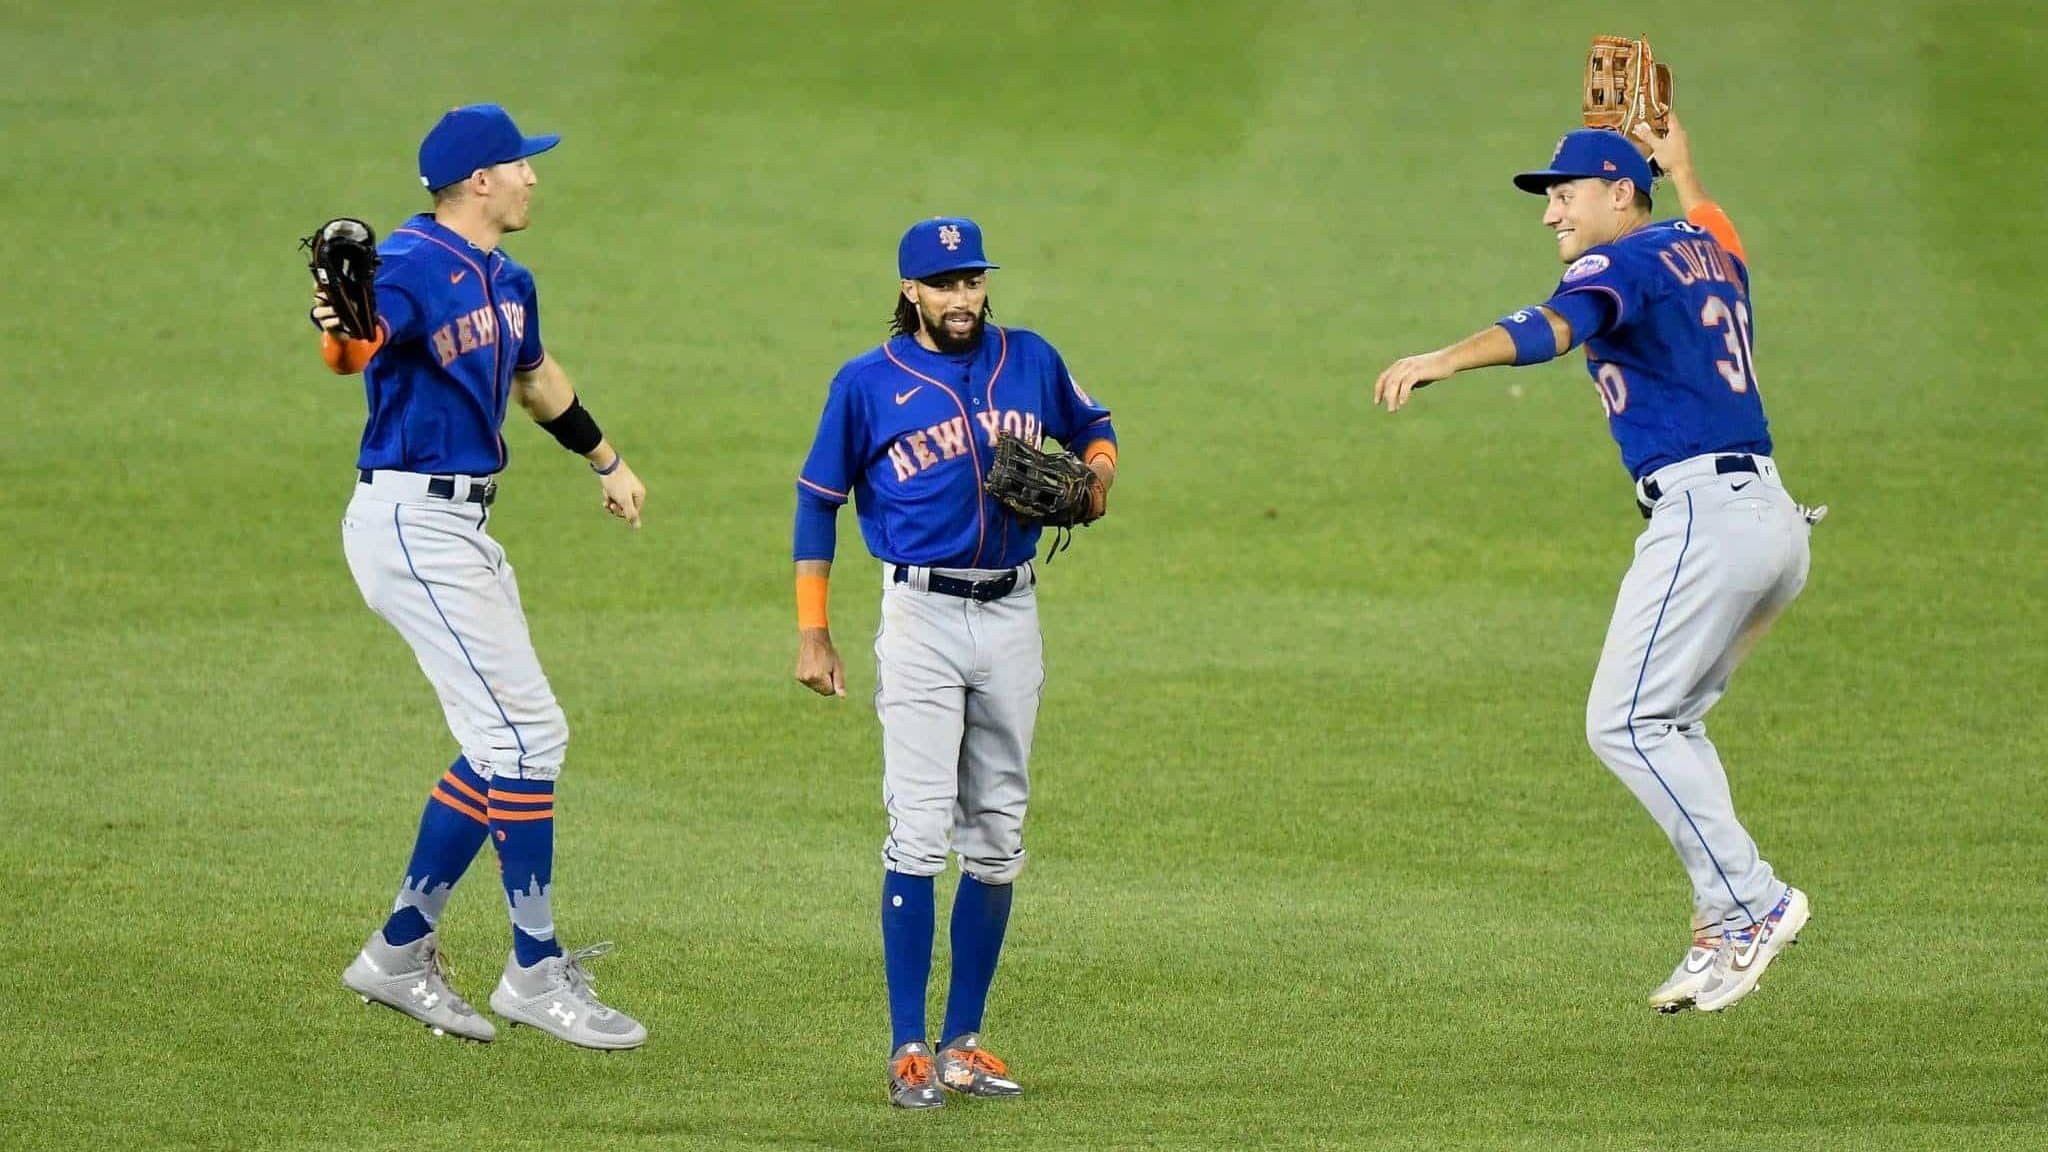 WASHINGTON, DC - AUGUST 05: Brandon Nimmo #9, Billy Hamilton #21 and Michael Conforto #30 of the New York Mets celebrate a 3-1 victory over the Washington Nationals at Nationals Park on August 5, 2020 in Washington, DC.